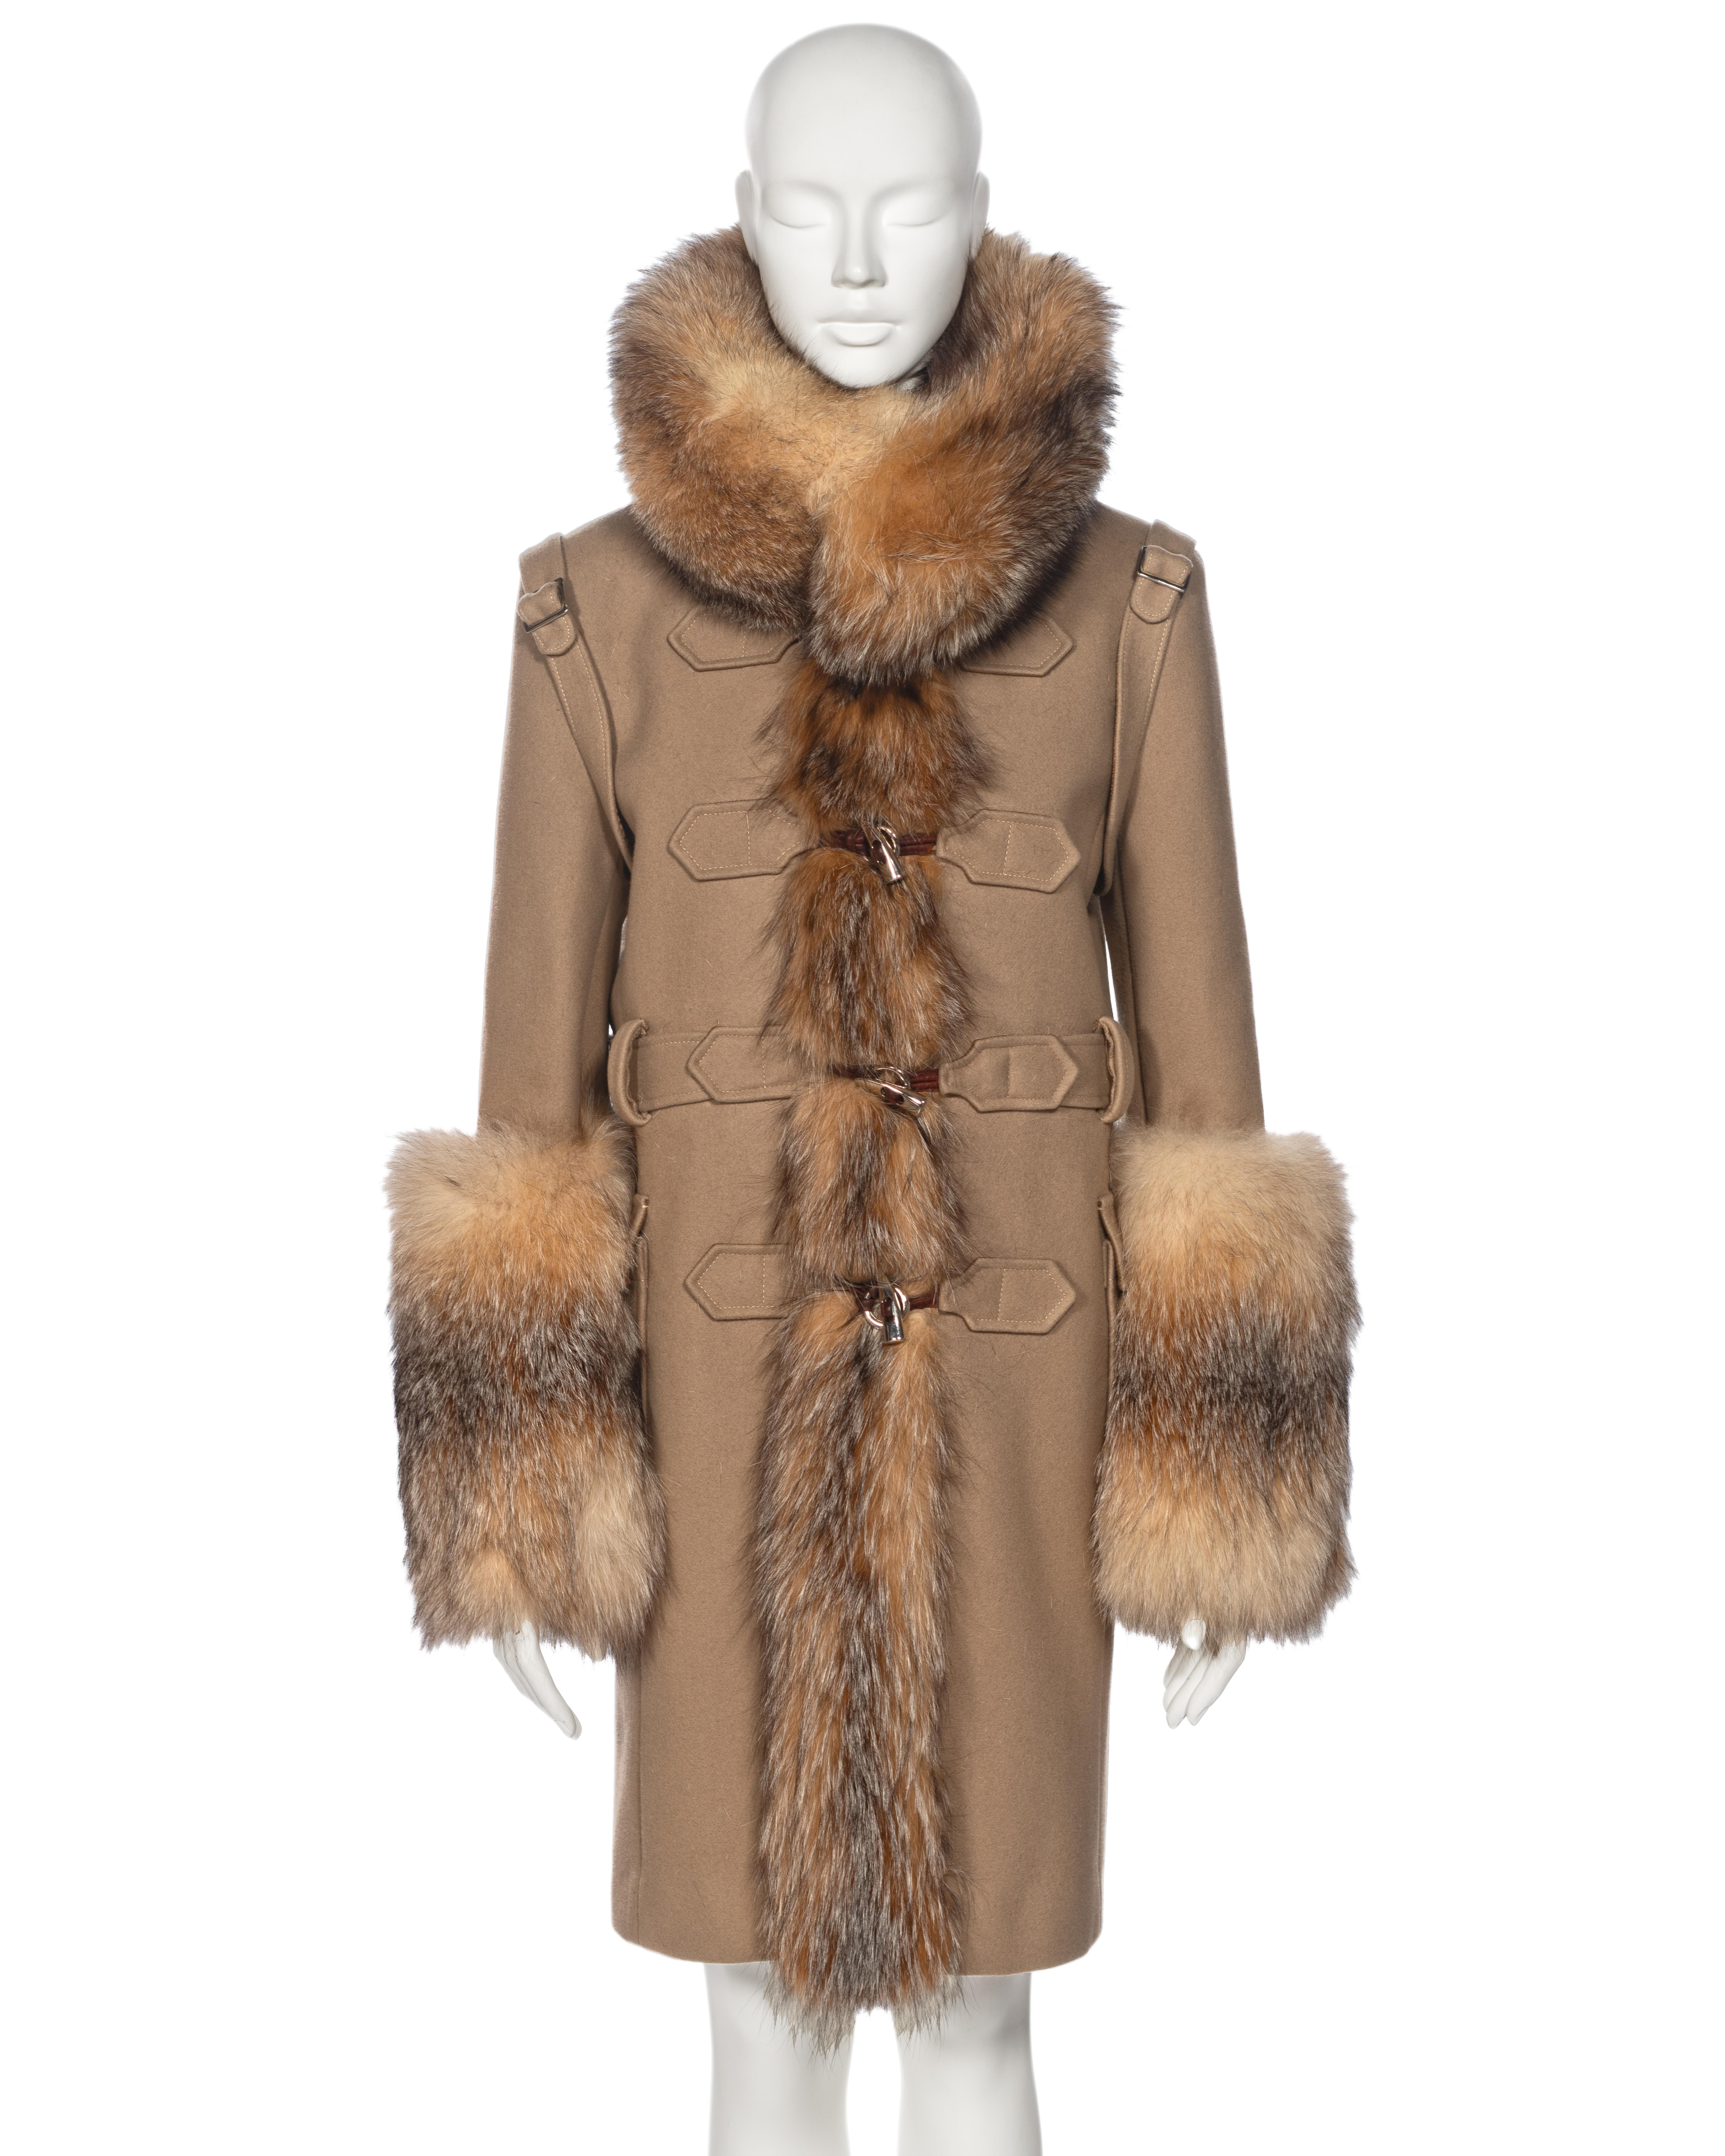 ▪ Archival Balenciaga Duffle Coat 
▪ Creative Director: Nicolas Ghesquière
▪ Fall-Winter 2005
▪ Sold by One of a Kind Archive
▪ Camel felted wool body
▪ Voluminous beaver fur collar, cuffs and trim
▪ Shoulder straps with buckle adornments
▪ Front